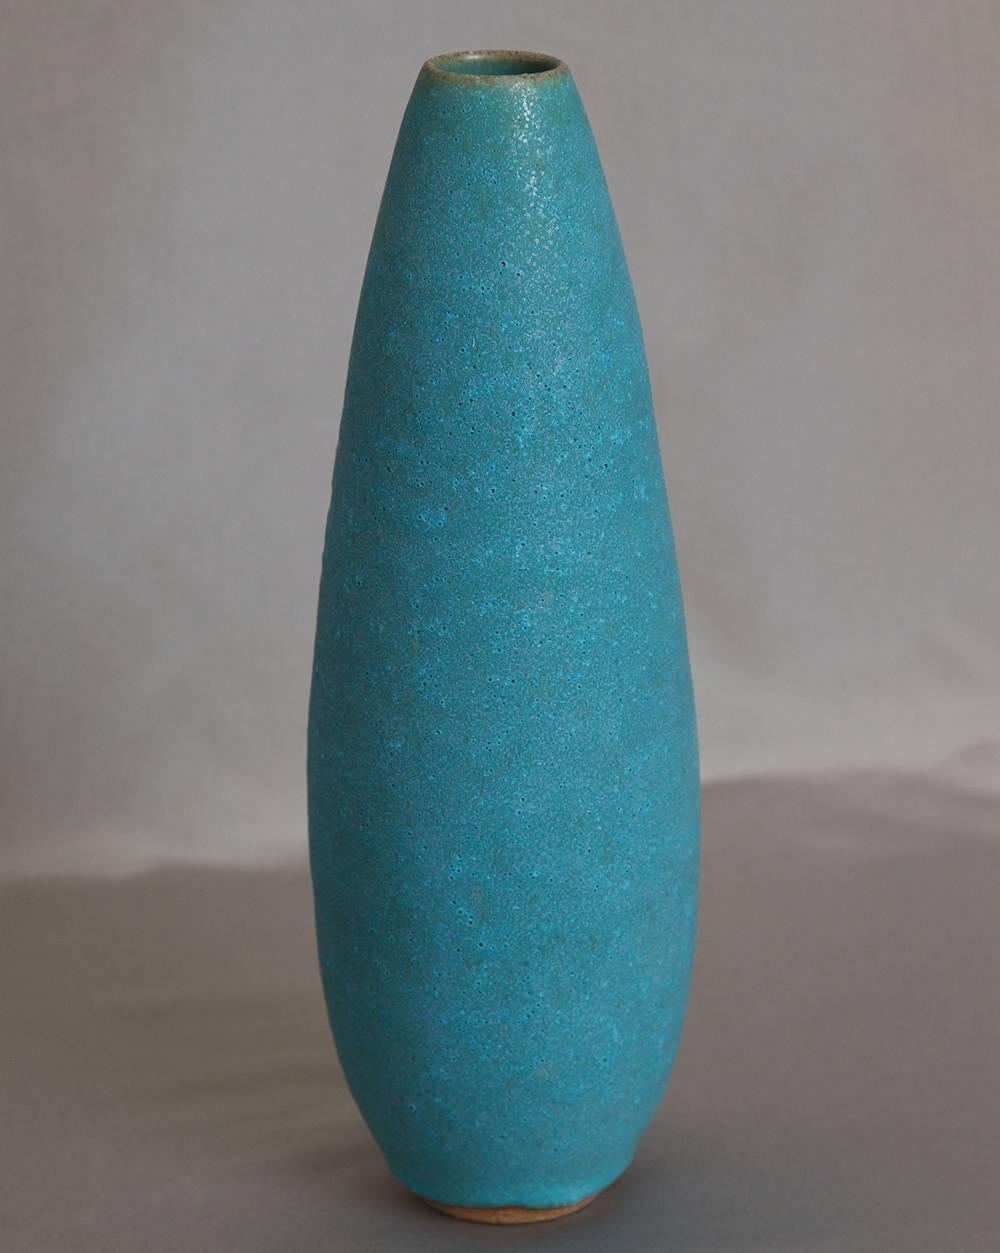 Sandra Zeenni.
“Turquoise vase despres”, 2014.
Stoneware vessel with matte turquoise glaze.
Signed SaZe

Based in Paris, Sandra's work has been included in museum exhibitions, recently 